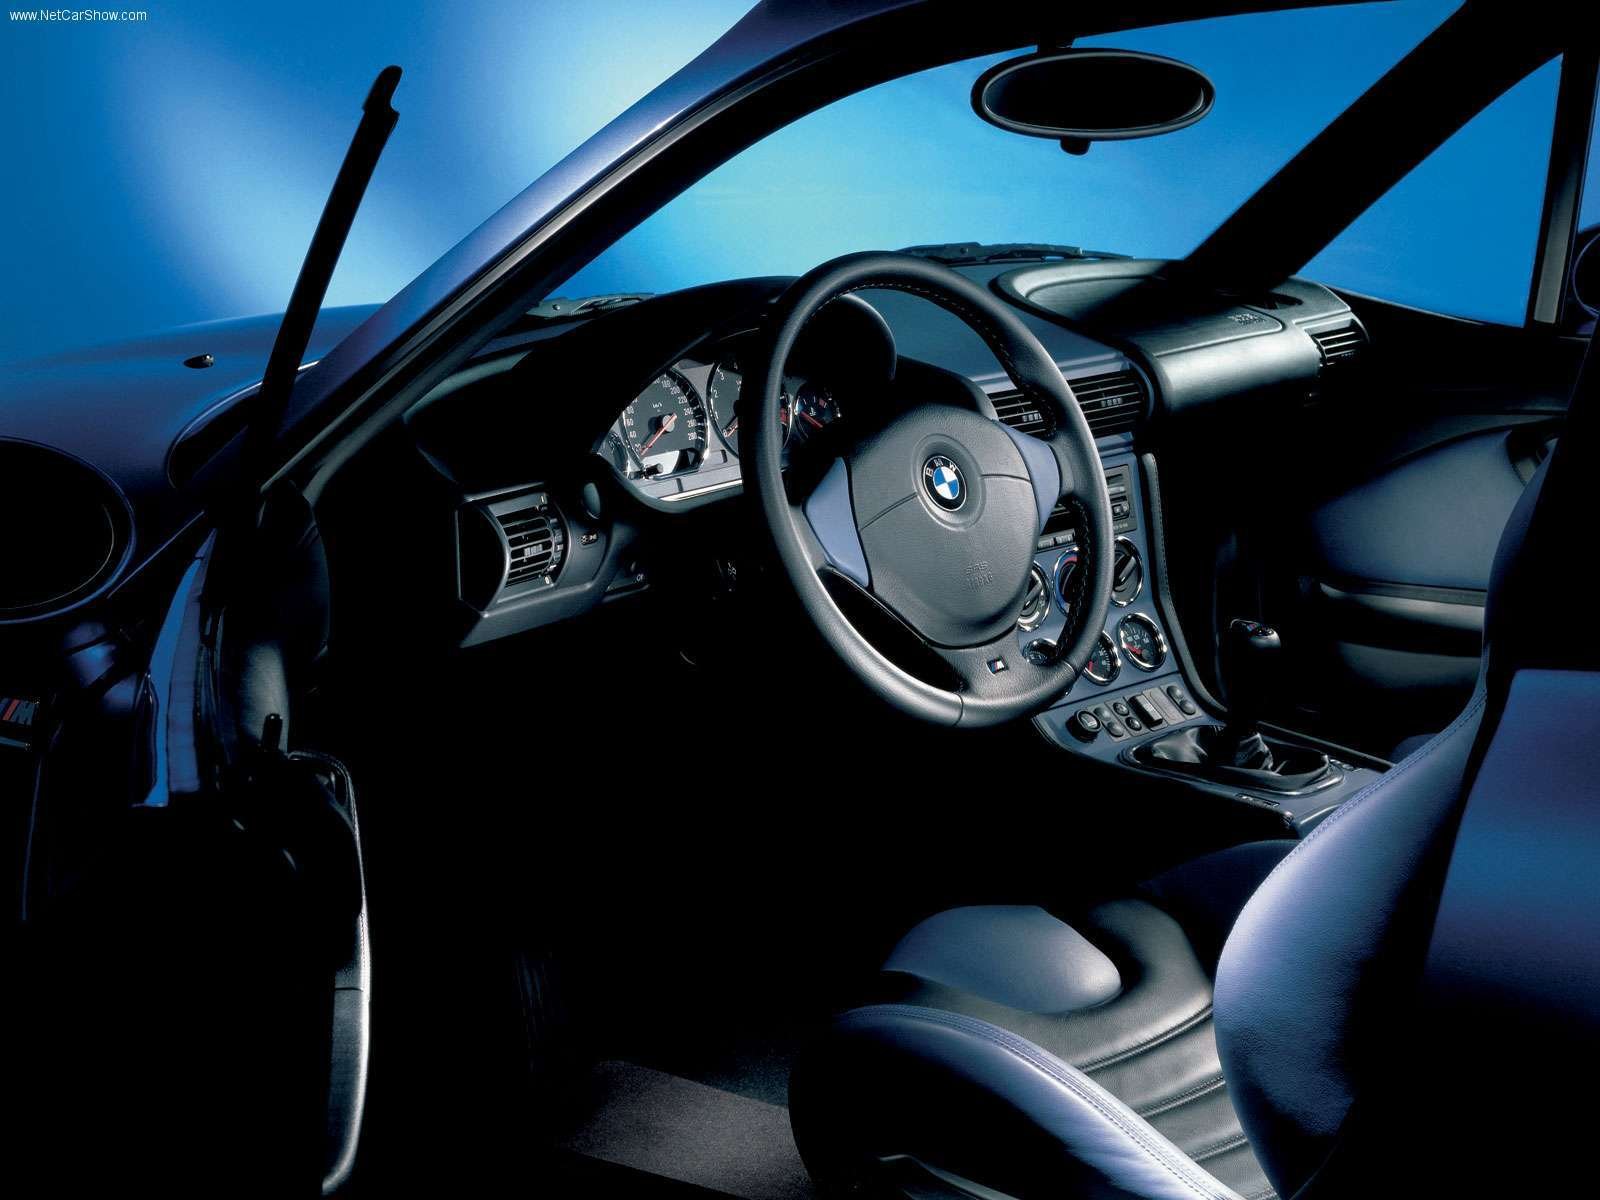 1999, Bmw, Z3 m, Coupe, Cars, Germany, Interior Wallpaper